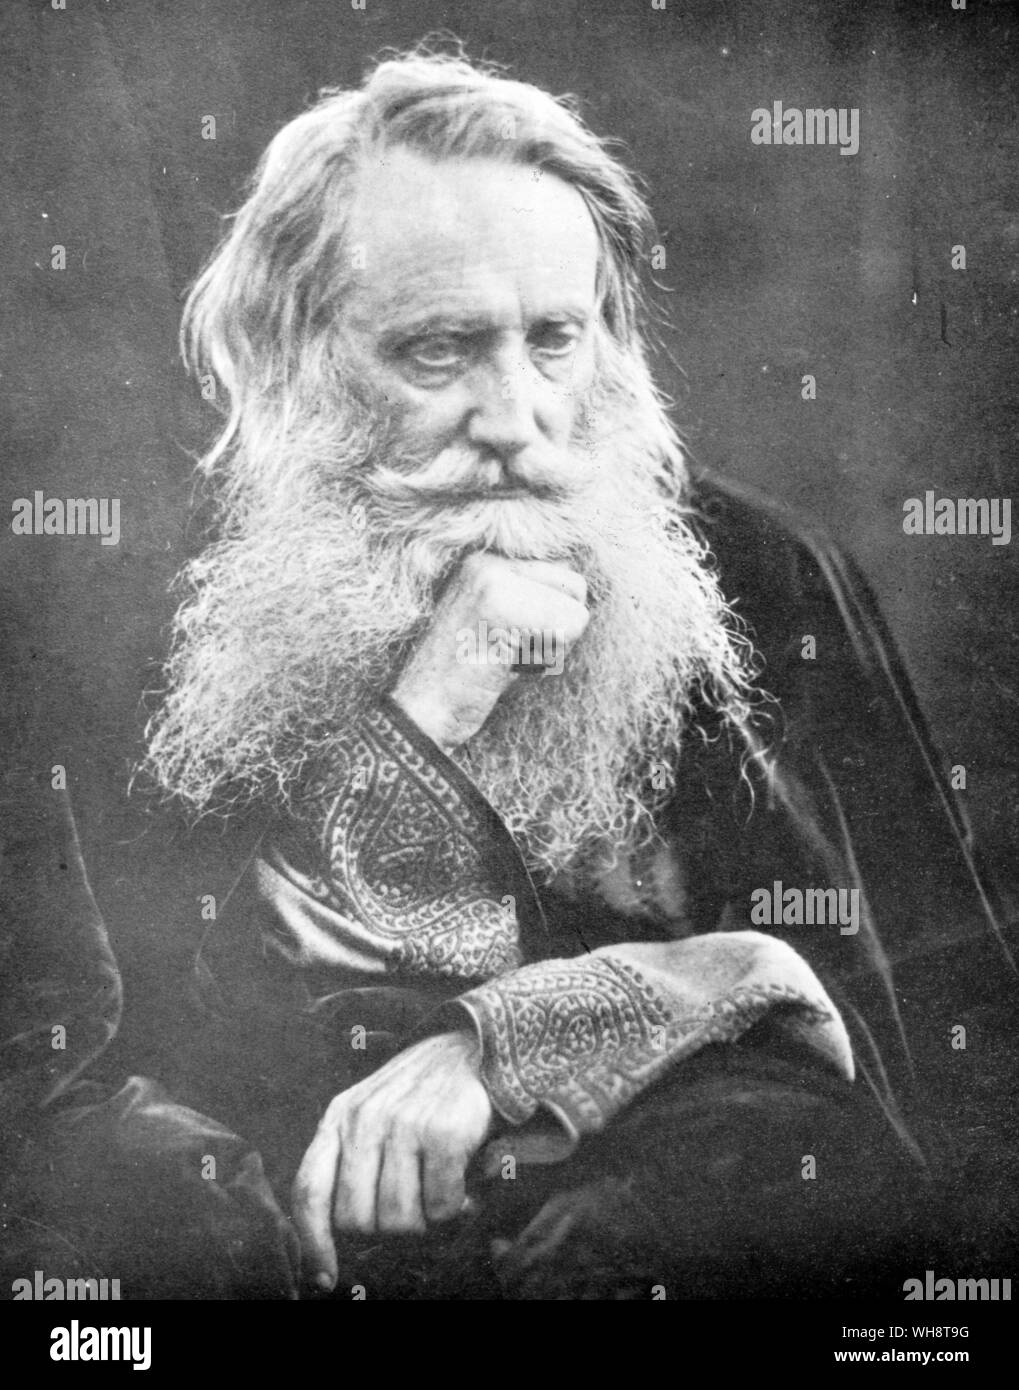 Sir Henry Taylor  in his mid sixties was in nineteenth century intellectual England, one of the venerated figures Stock Photo